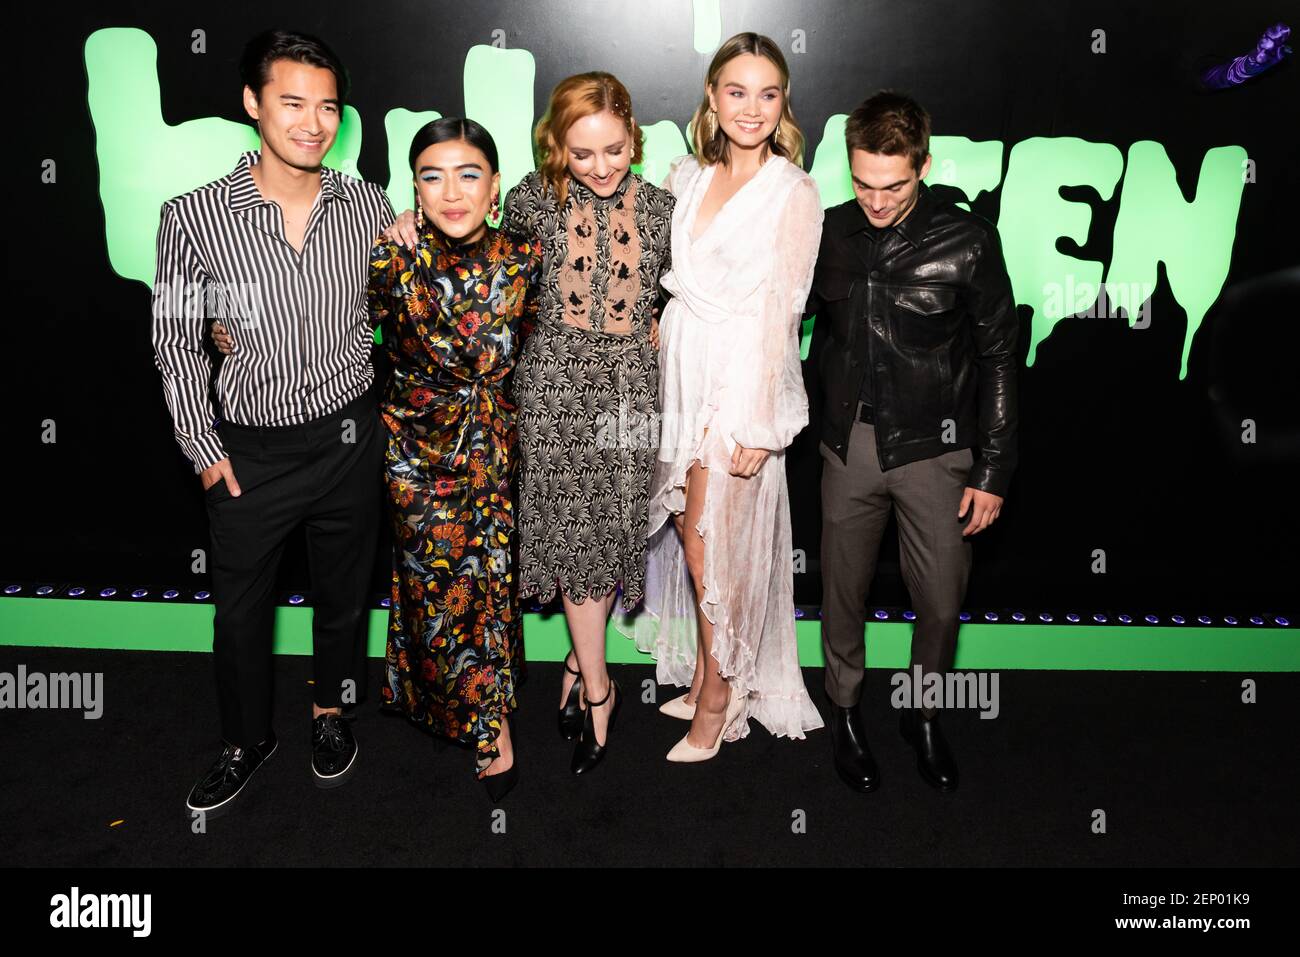 L-R) The cast of "Light as Feather", Jordan Rodrigues, Brianne Tju, Haley Ramm, Liana Liberto, and Dylan Sprayberry, attend Hulu's "Huluween" kick-off celebration to Halloween during New York Comic Con at